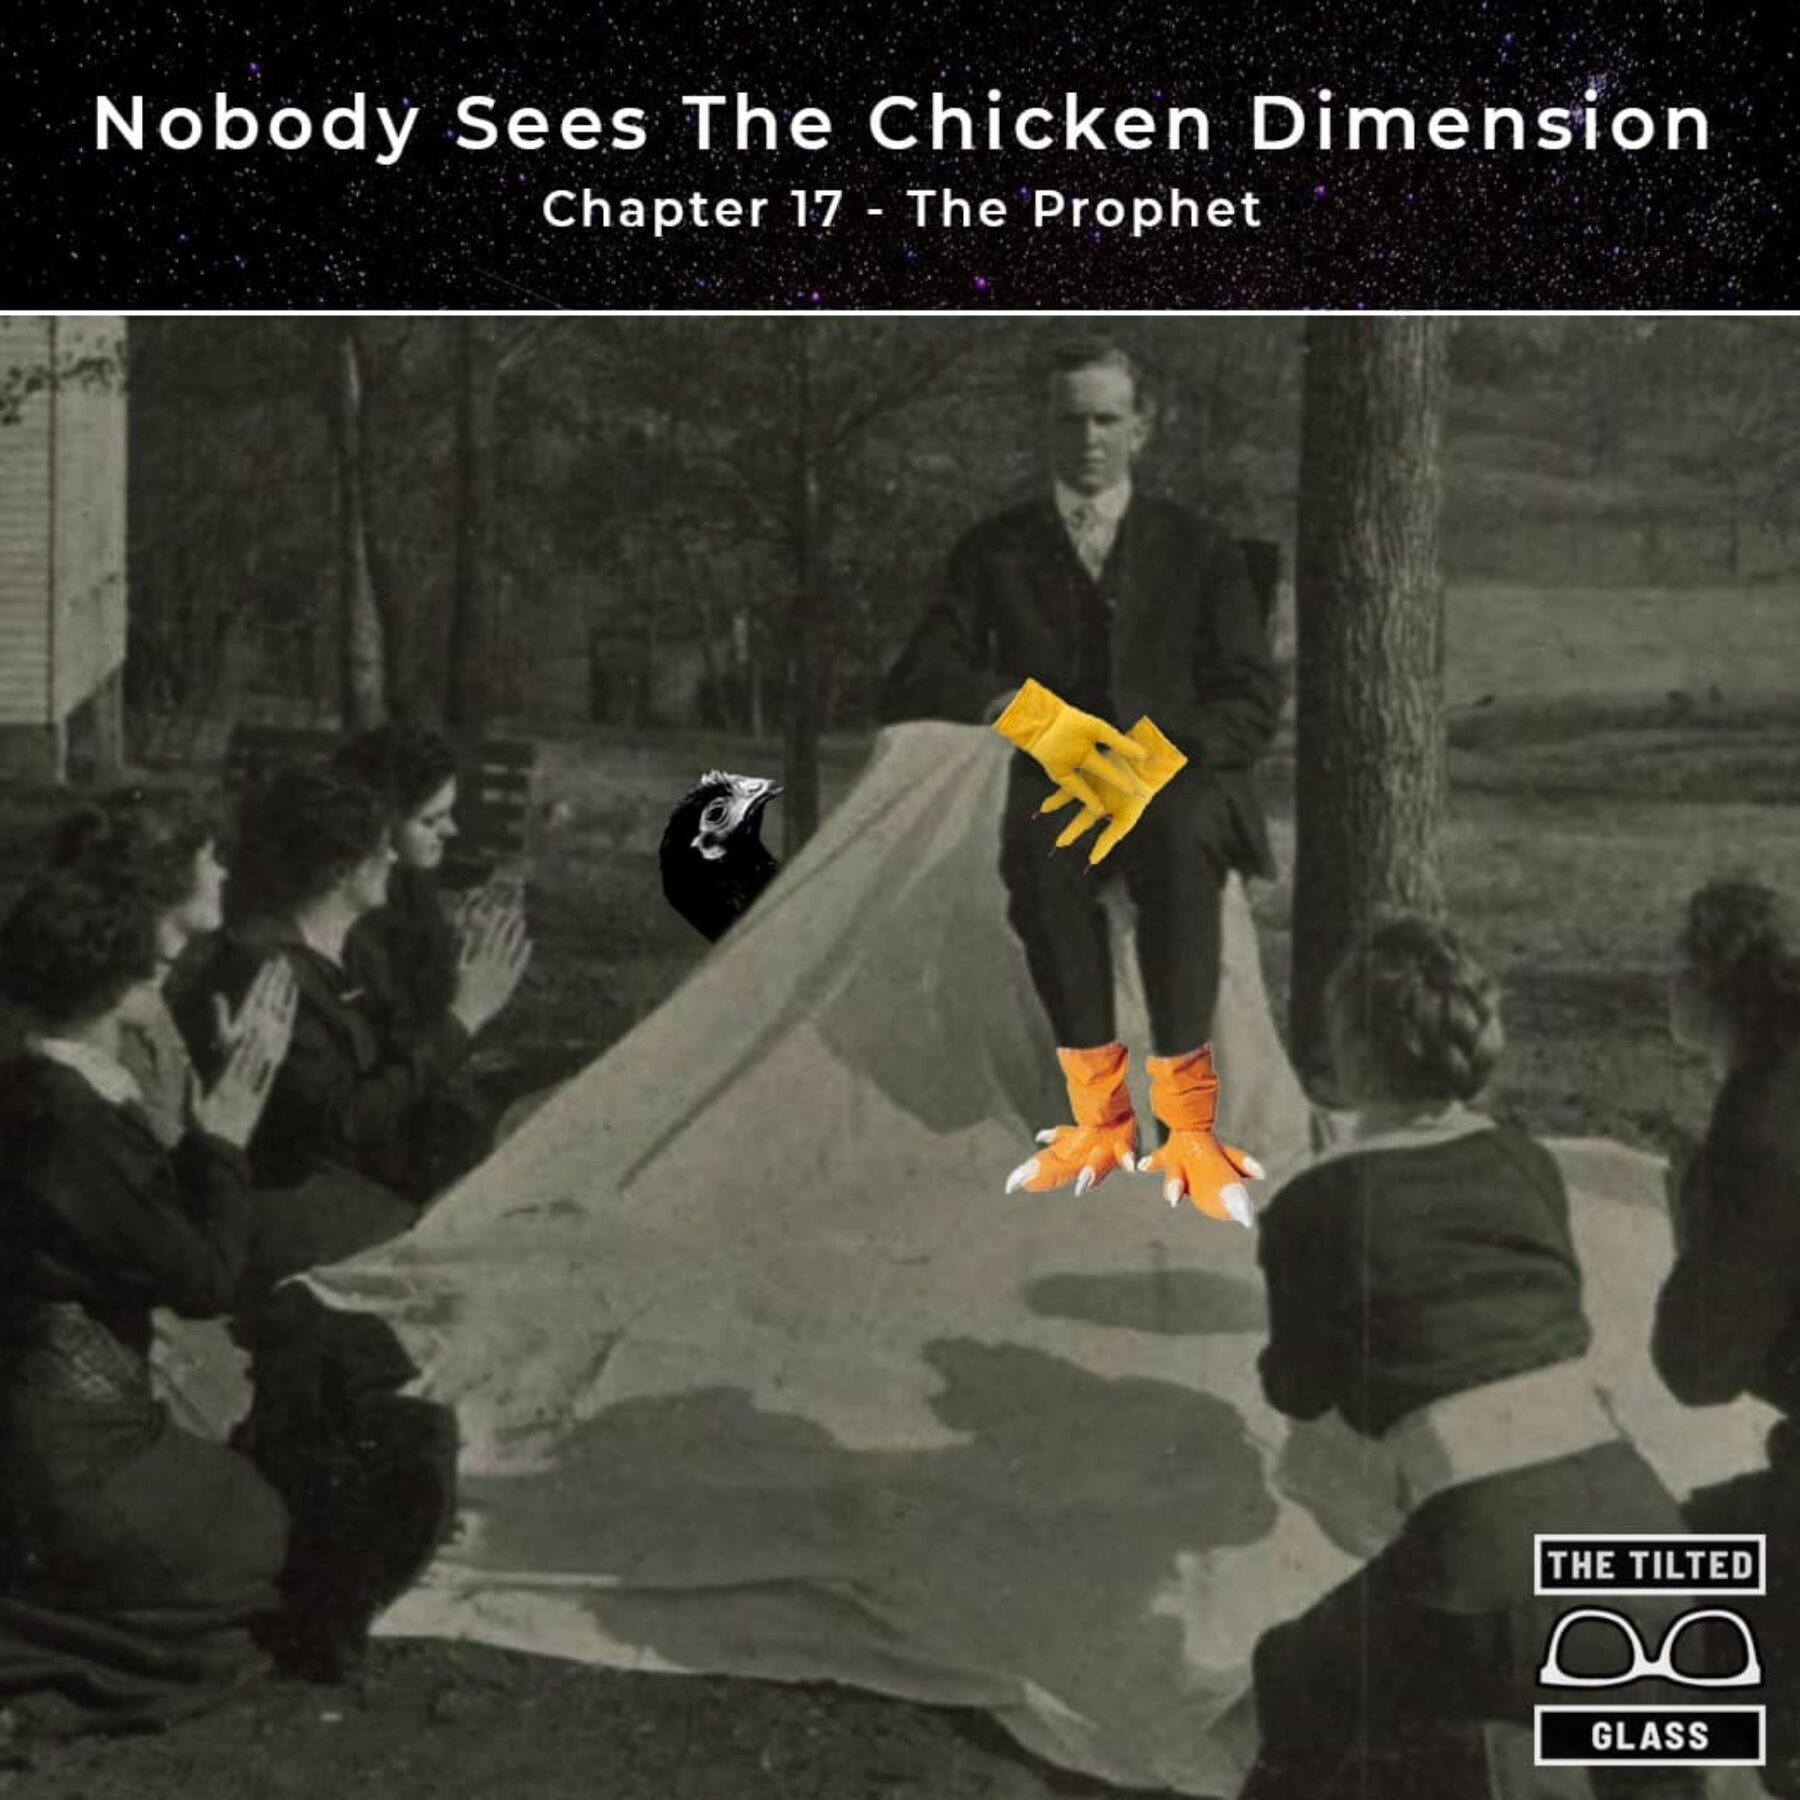 The Chicken Dimension - Chapter 17 - The Prophet